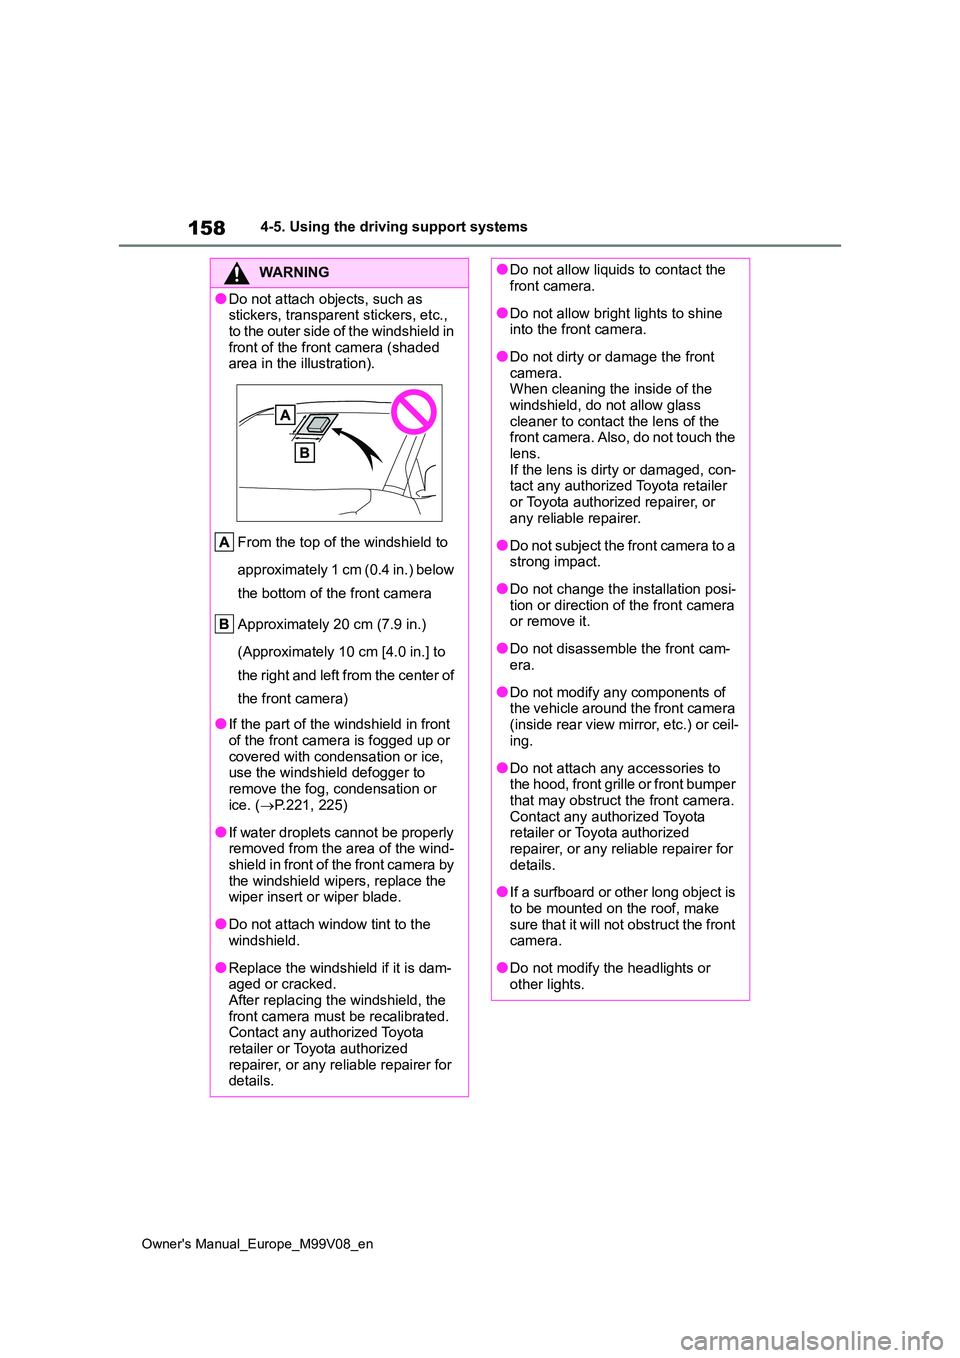 TOYOTA AYGO X 2022  Owners Manual (in English) 158
Owner's Manual_Europe_M99V08_en
4-5. Using the driving support systems
WARNING
●Do not attach objects, such as  stickers, transparent stickers, etc.,  
to the outer side of the windshield in